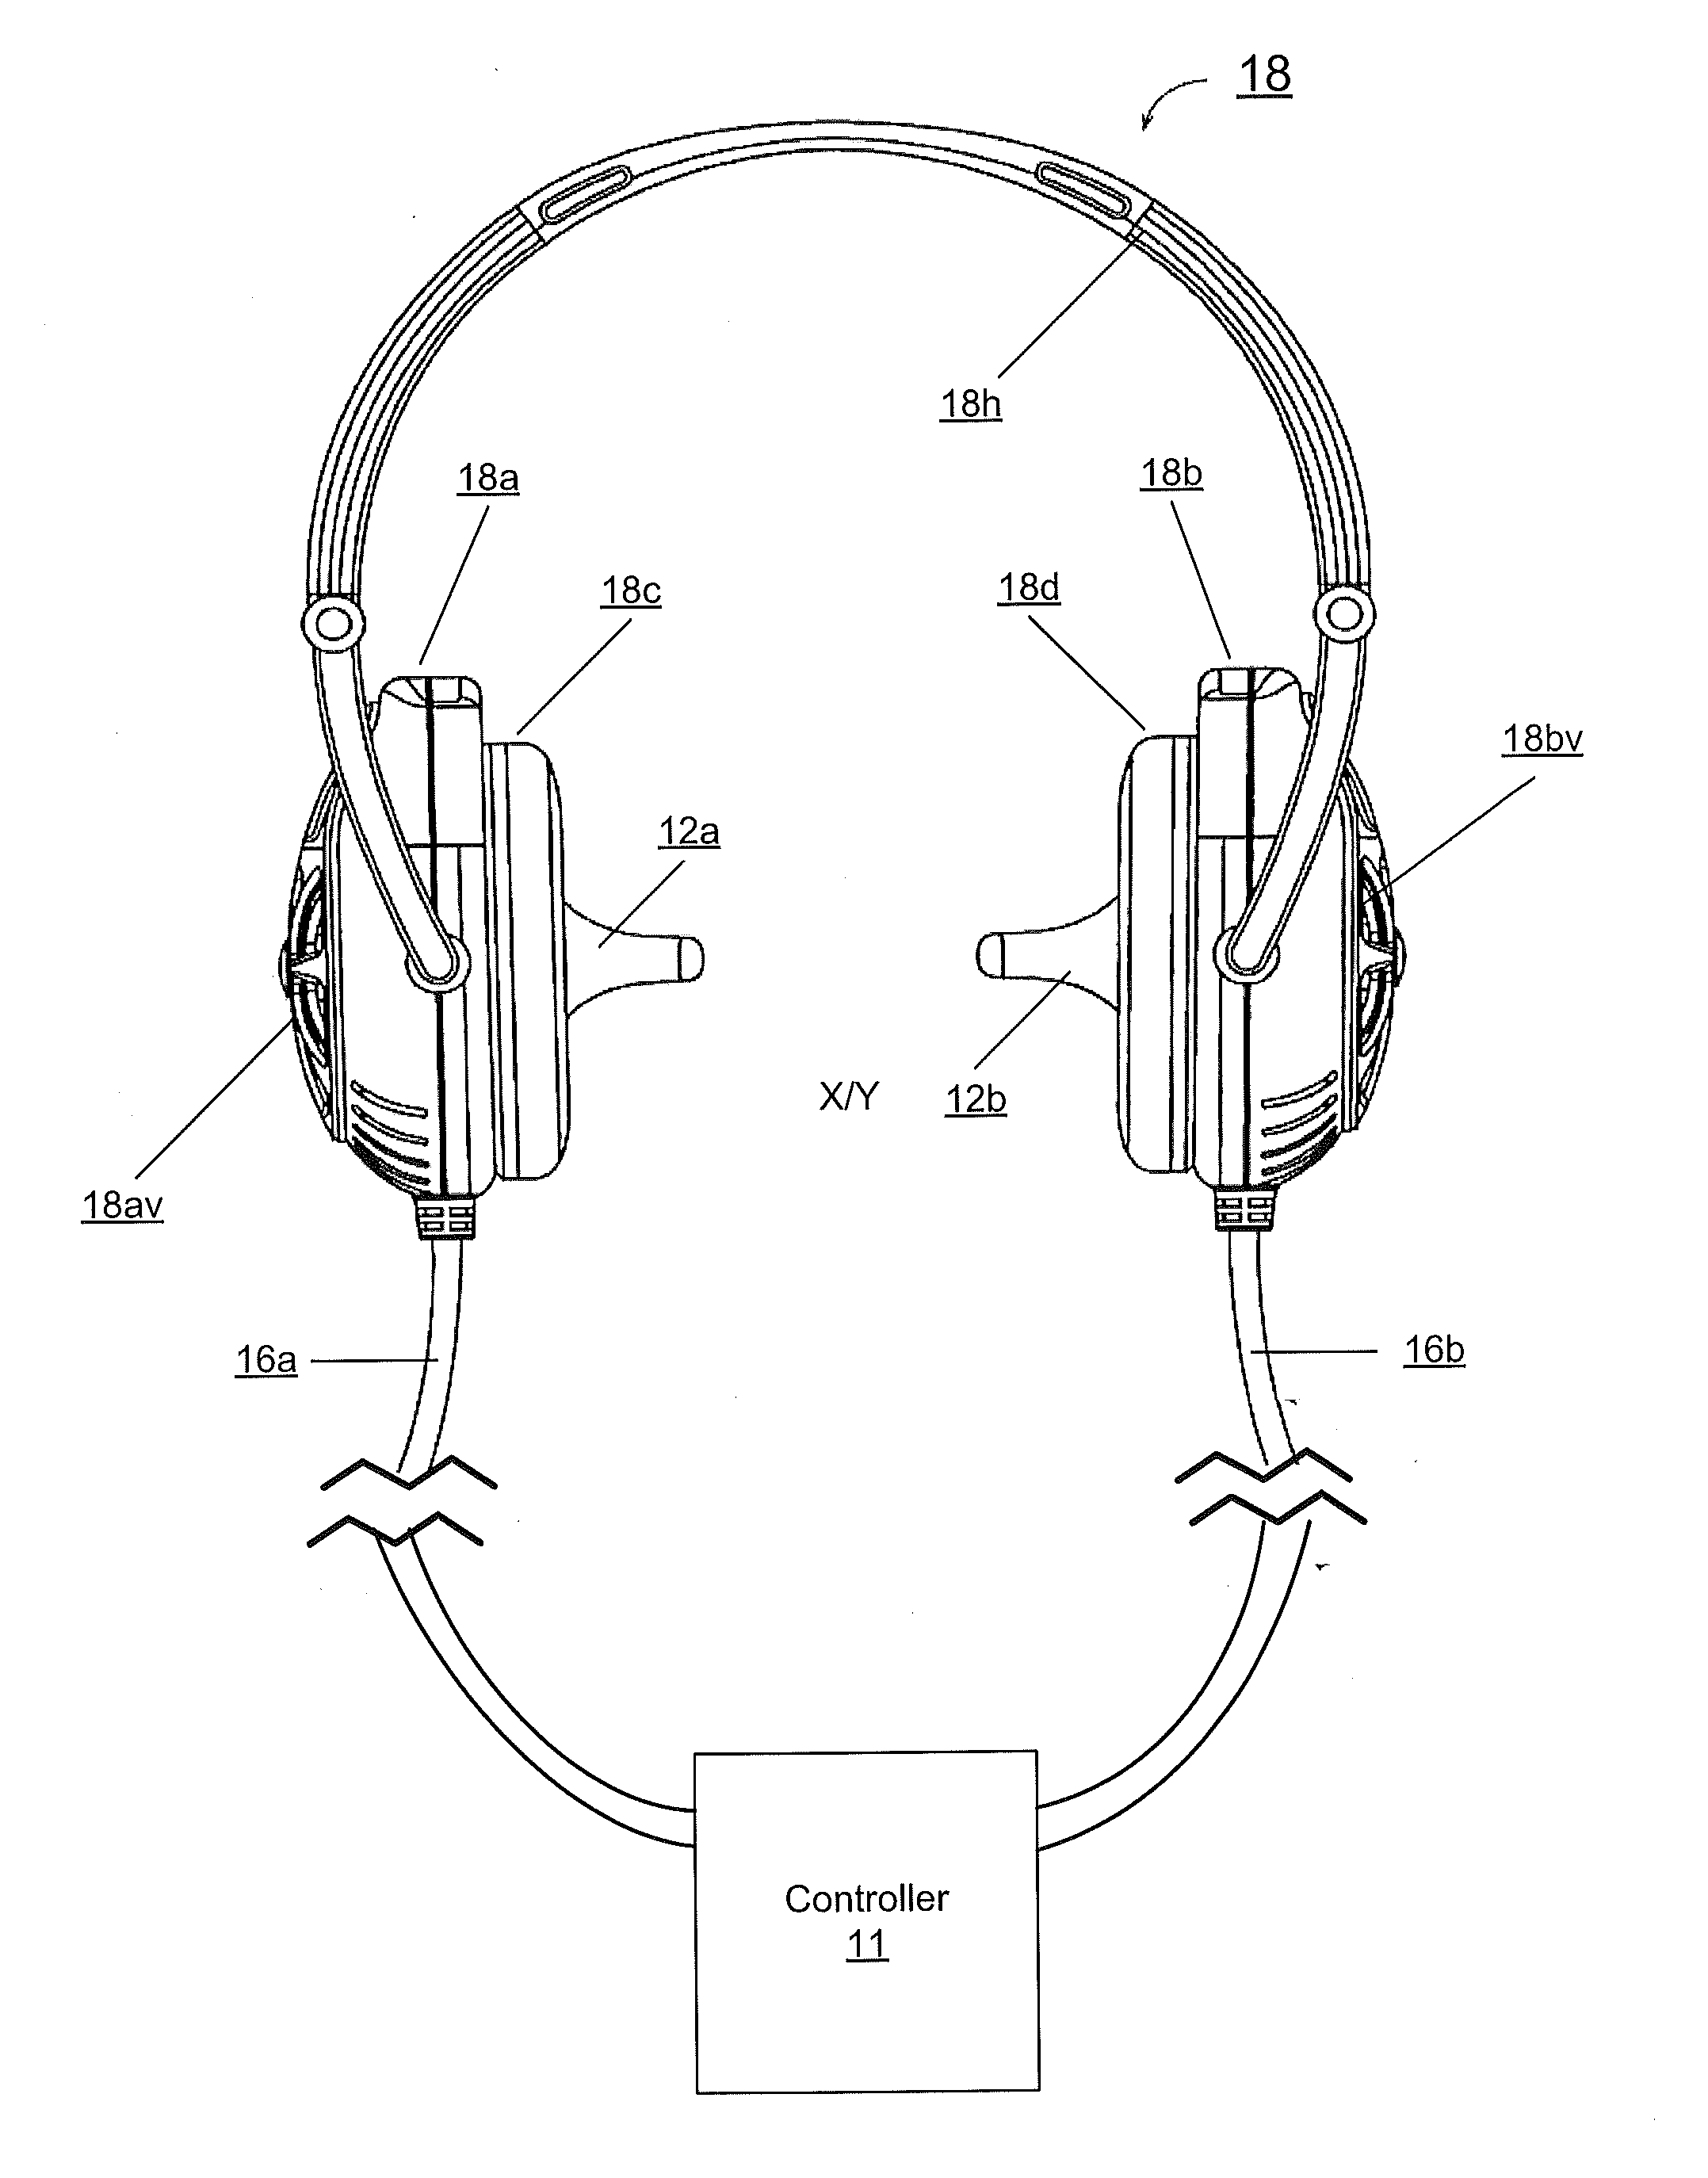 Apparatus and methods for producing brain activation via the vestibular system with time-varying waveforms